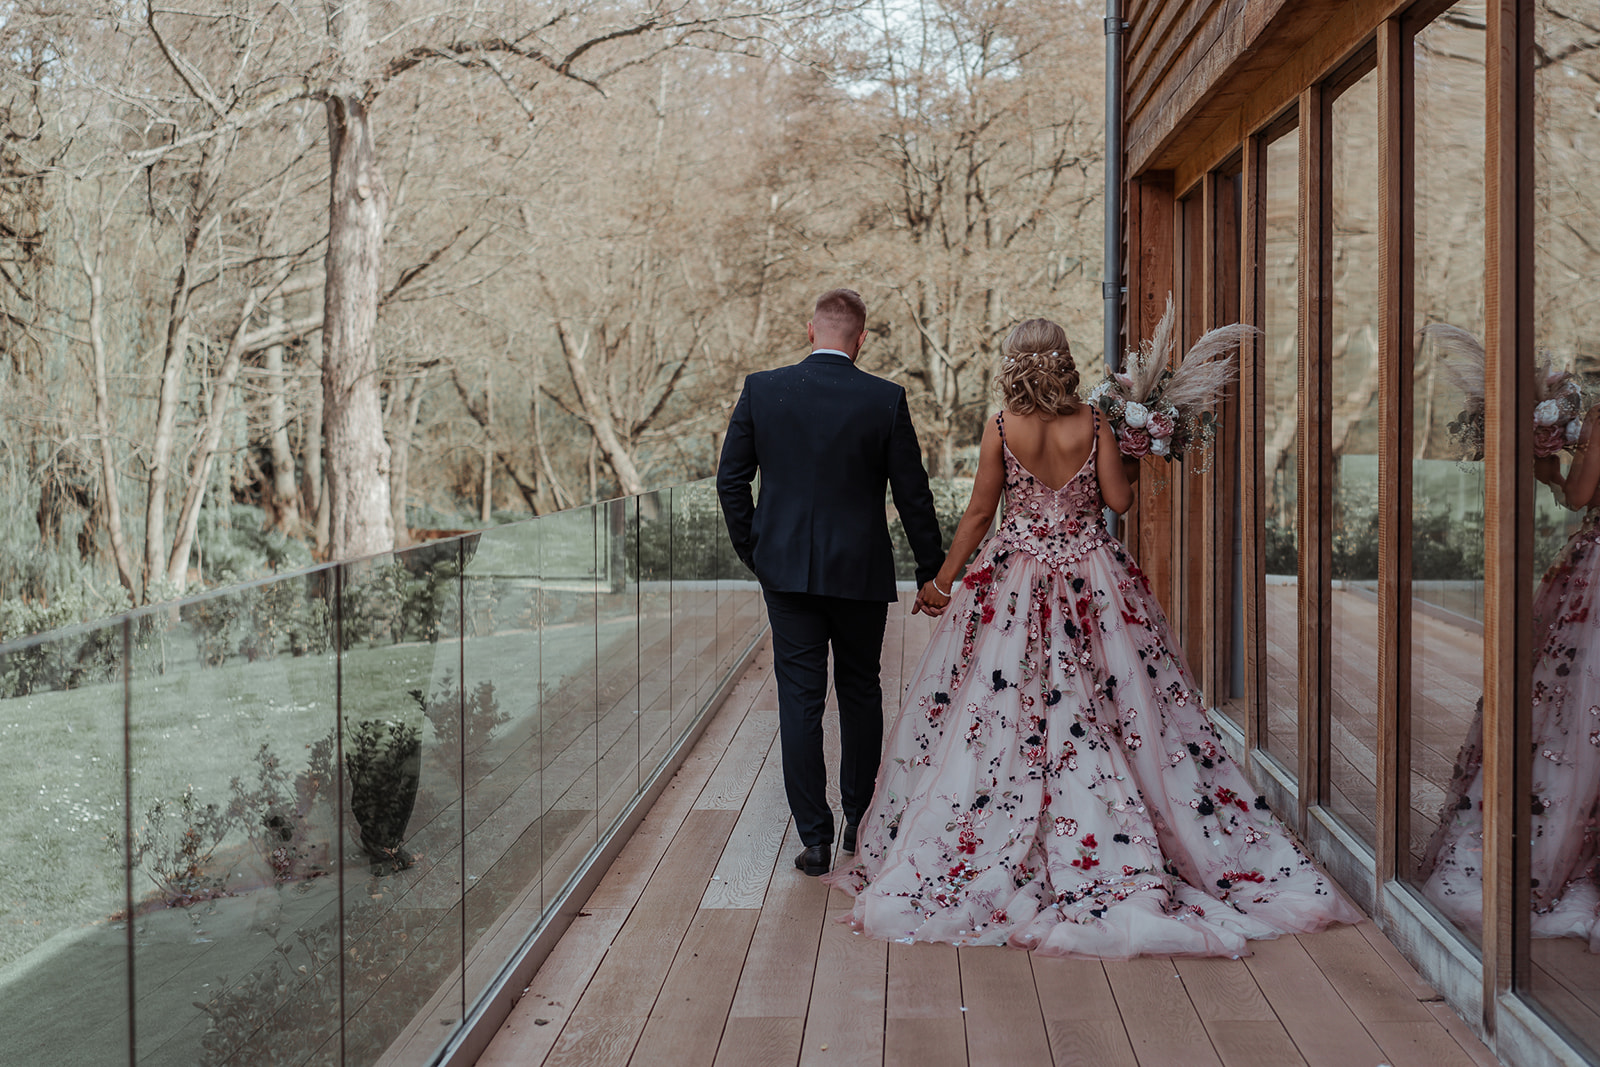 Ronald Joyce real bride, Rebecca, and her husband, Michael, holding hands and walking outside on their wedding day. Rebecca has curled blonde hair and wears our Celestina ballgown wedding dress, a colourful ballgown with coloured floral appliques.